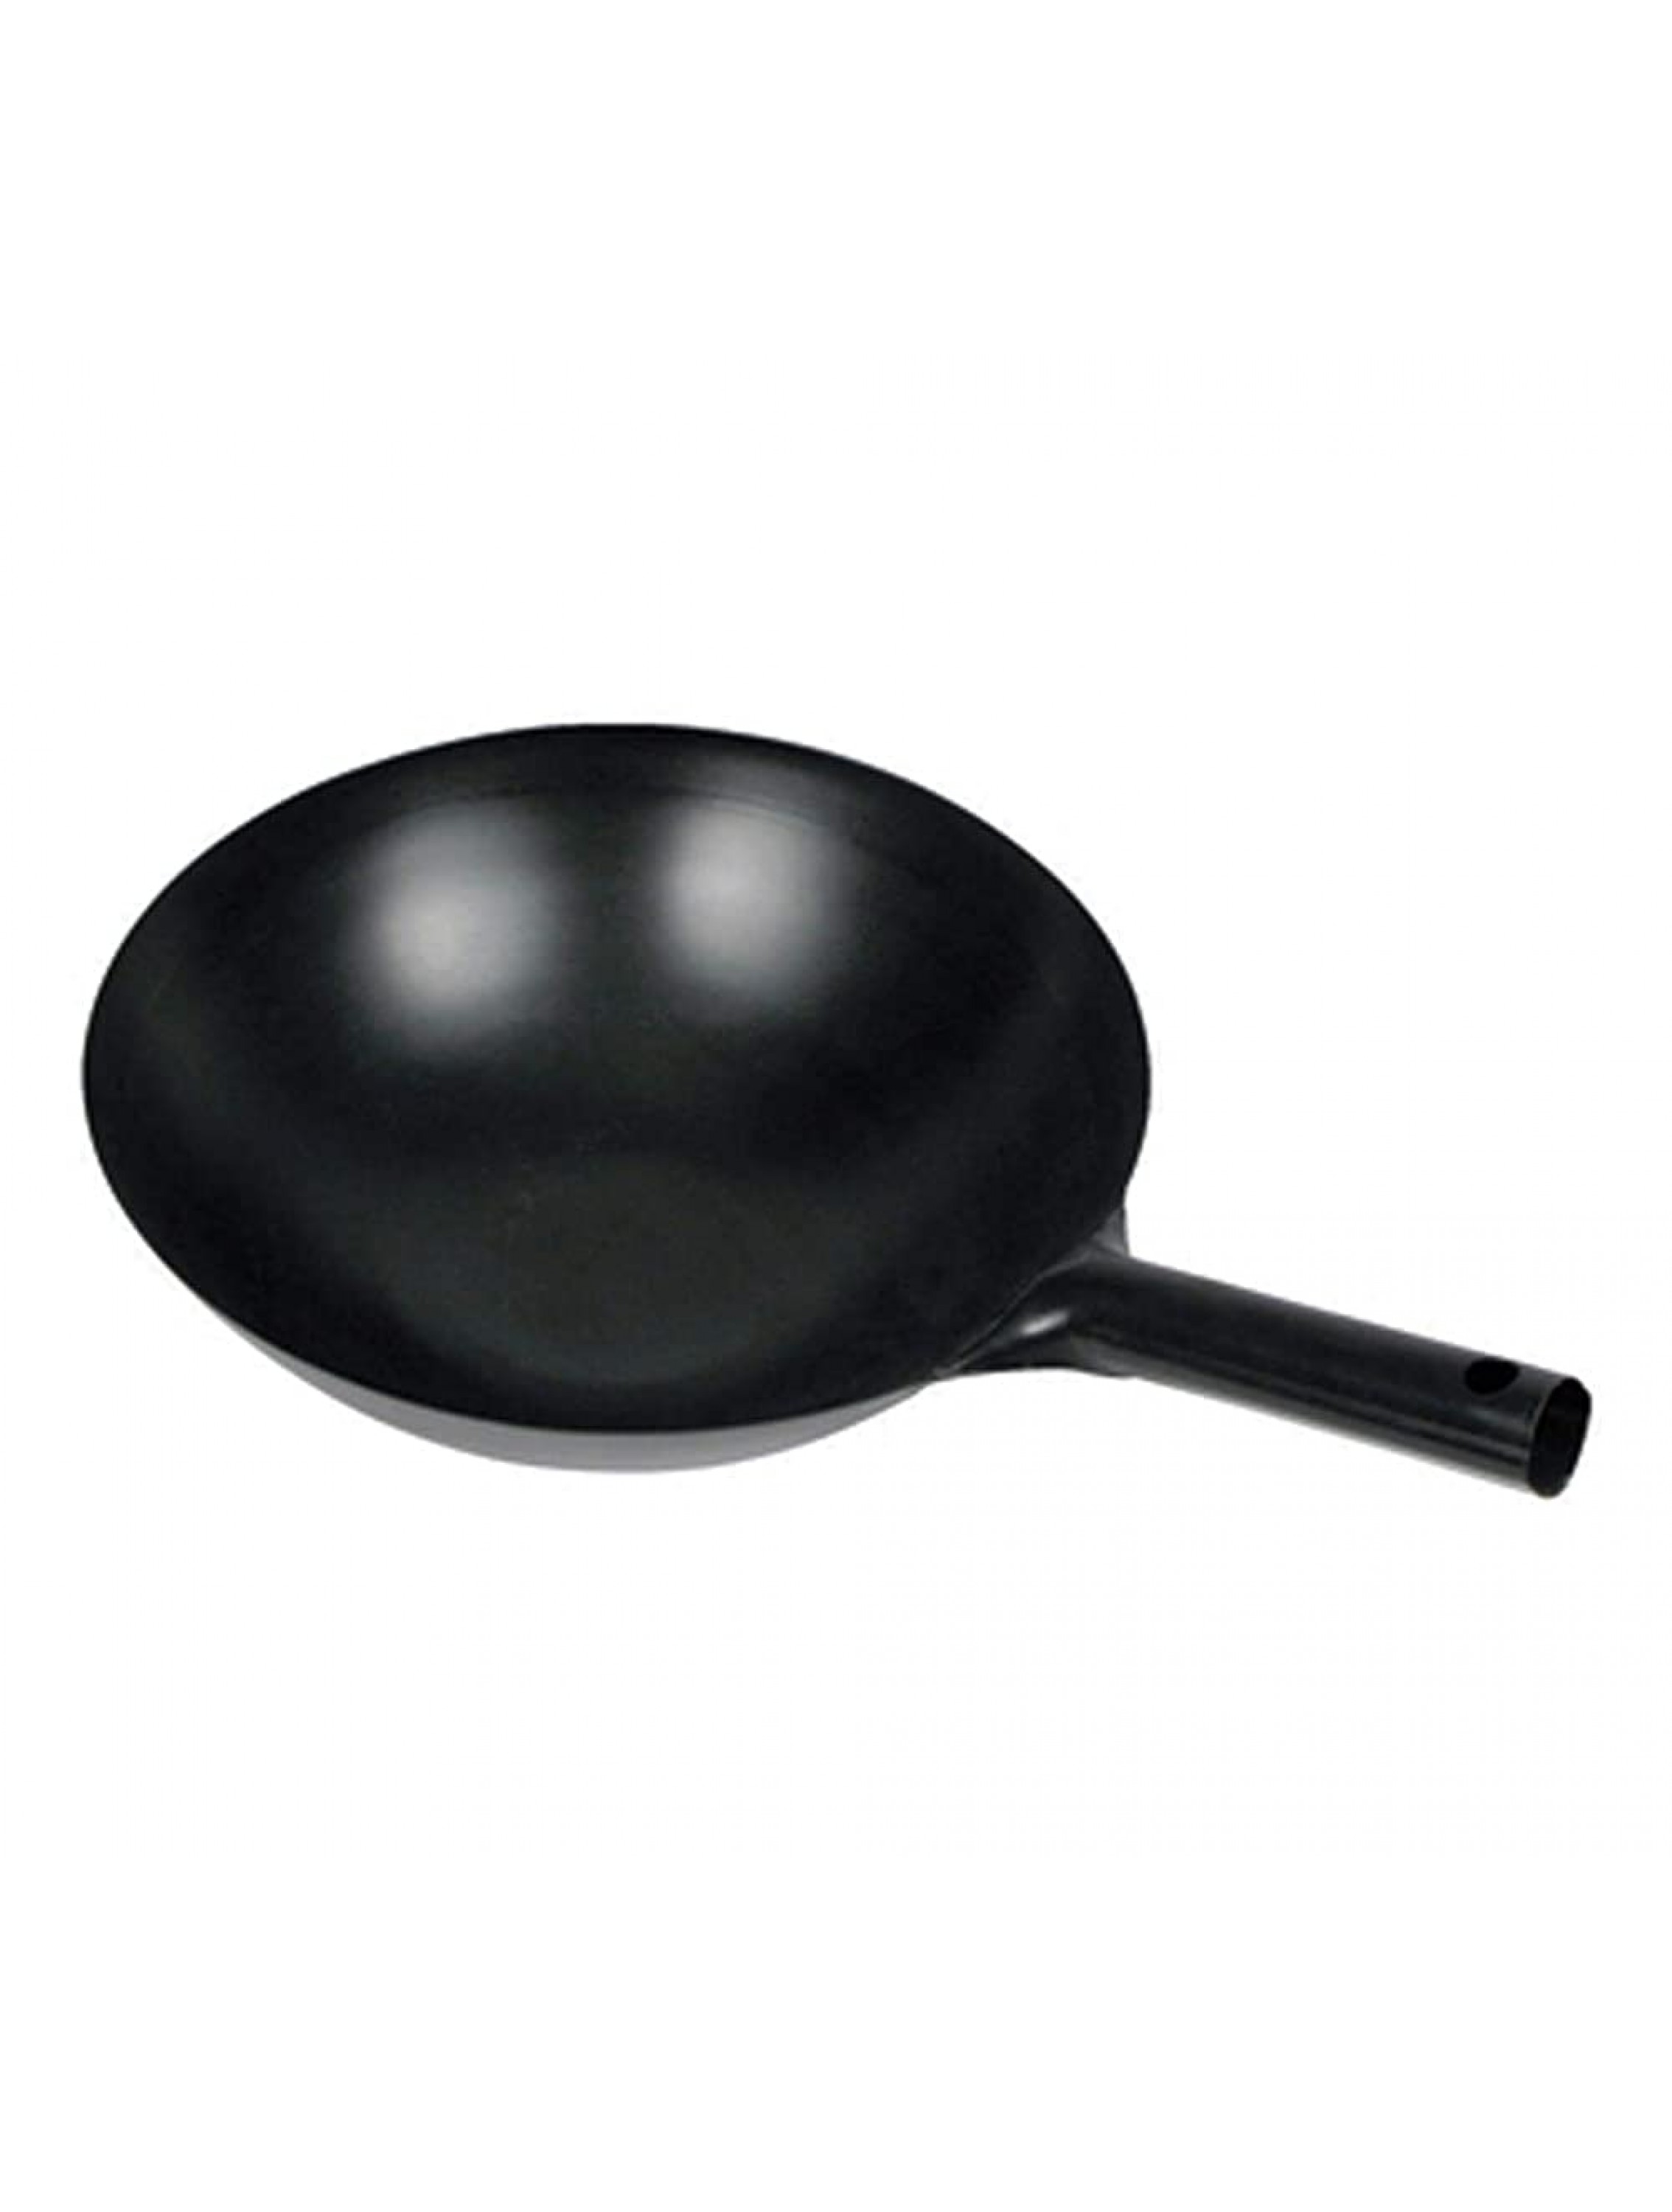 Winco Chinese Wok with Integral Handle 14-Inch Black - BP6NQPXOA